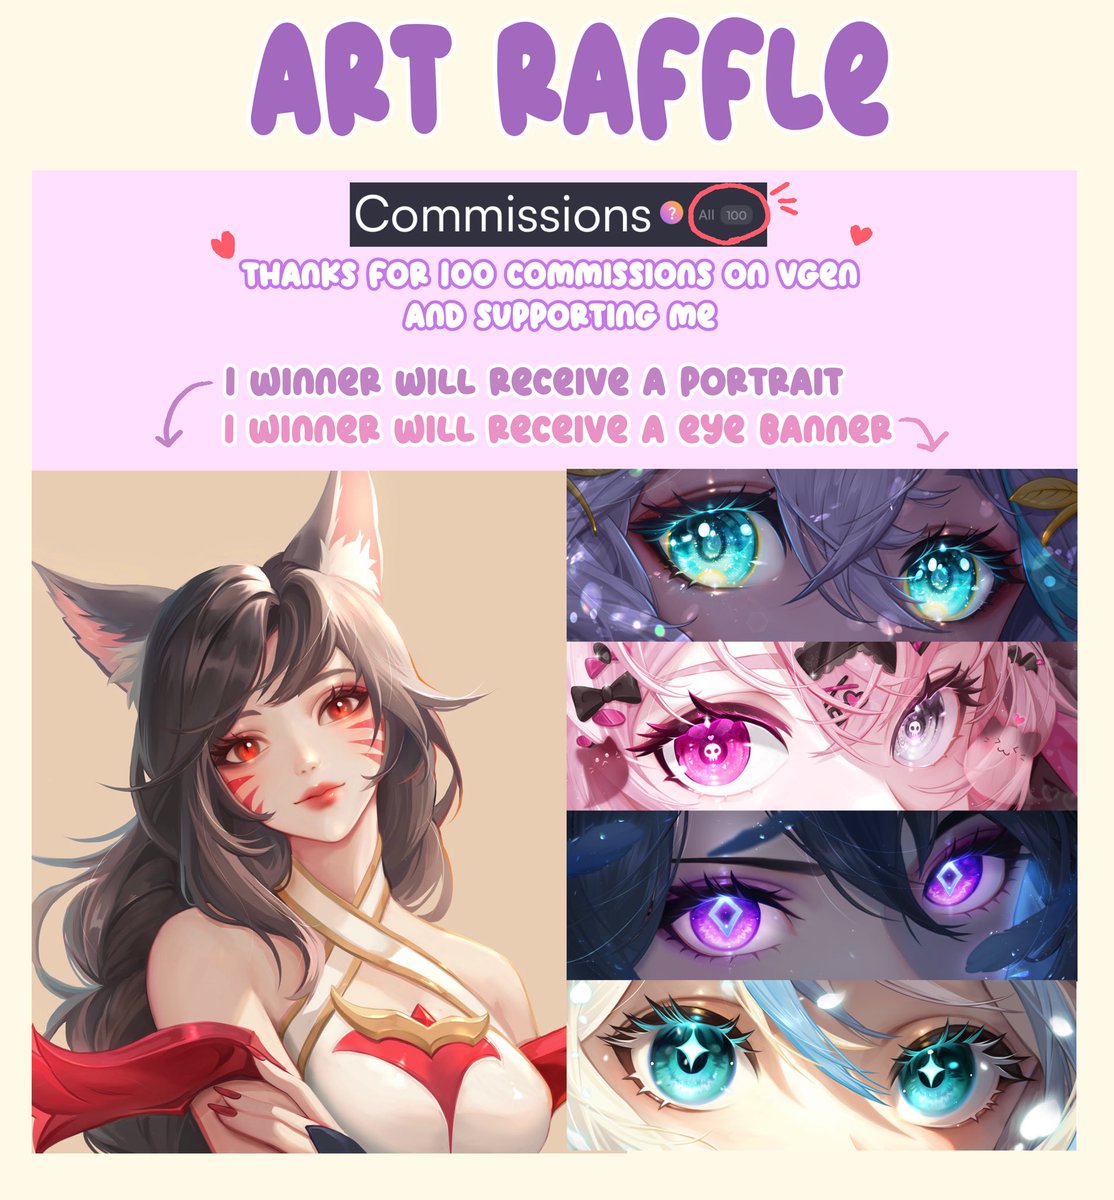 💜💜💜ART RAFFLE💜💜💜
Thanks for the 100 commissions on VGen. It was a huge support to me to continue art. 

To celebrate reaching my goal, 100 comms, I’ll do an art raffle💕

To enter
🫧 Follow Me
🫧 Like & RT
🫧 Drop your png

1 winner will receive a portrait 
1 winner will